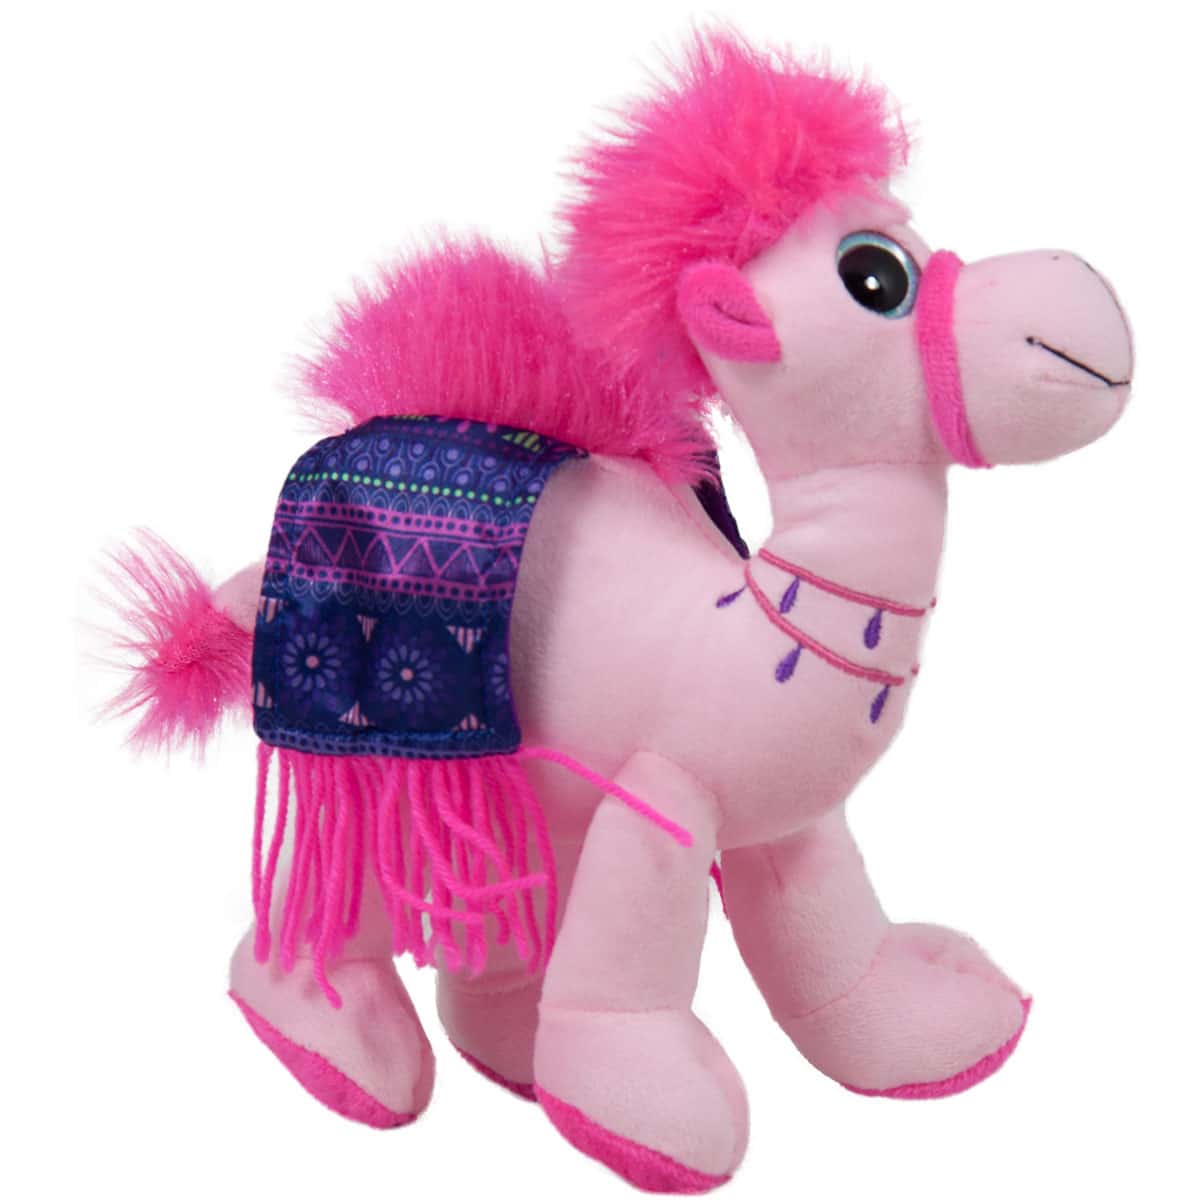 Camel with a colorful saddle - Pink